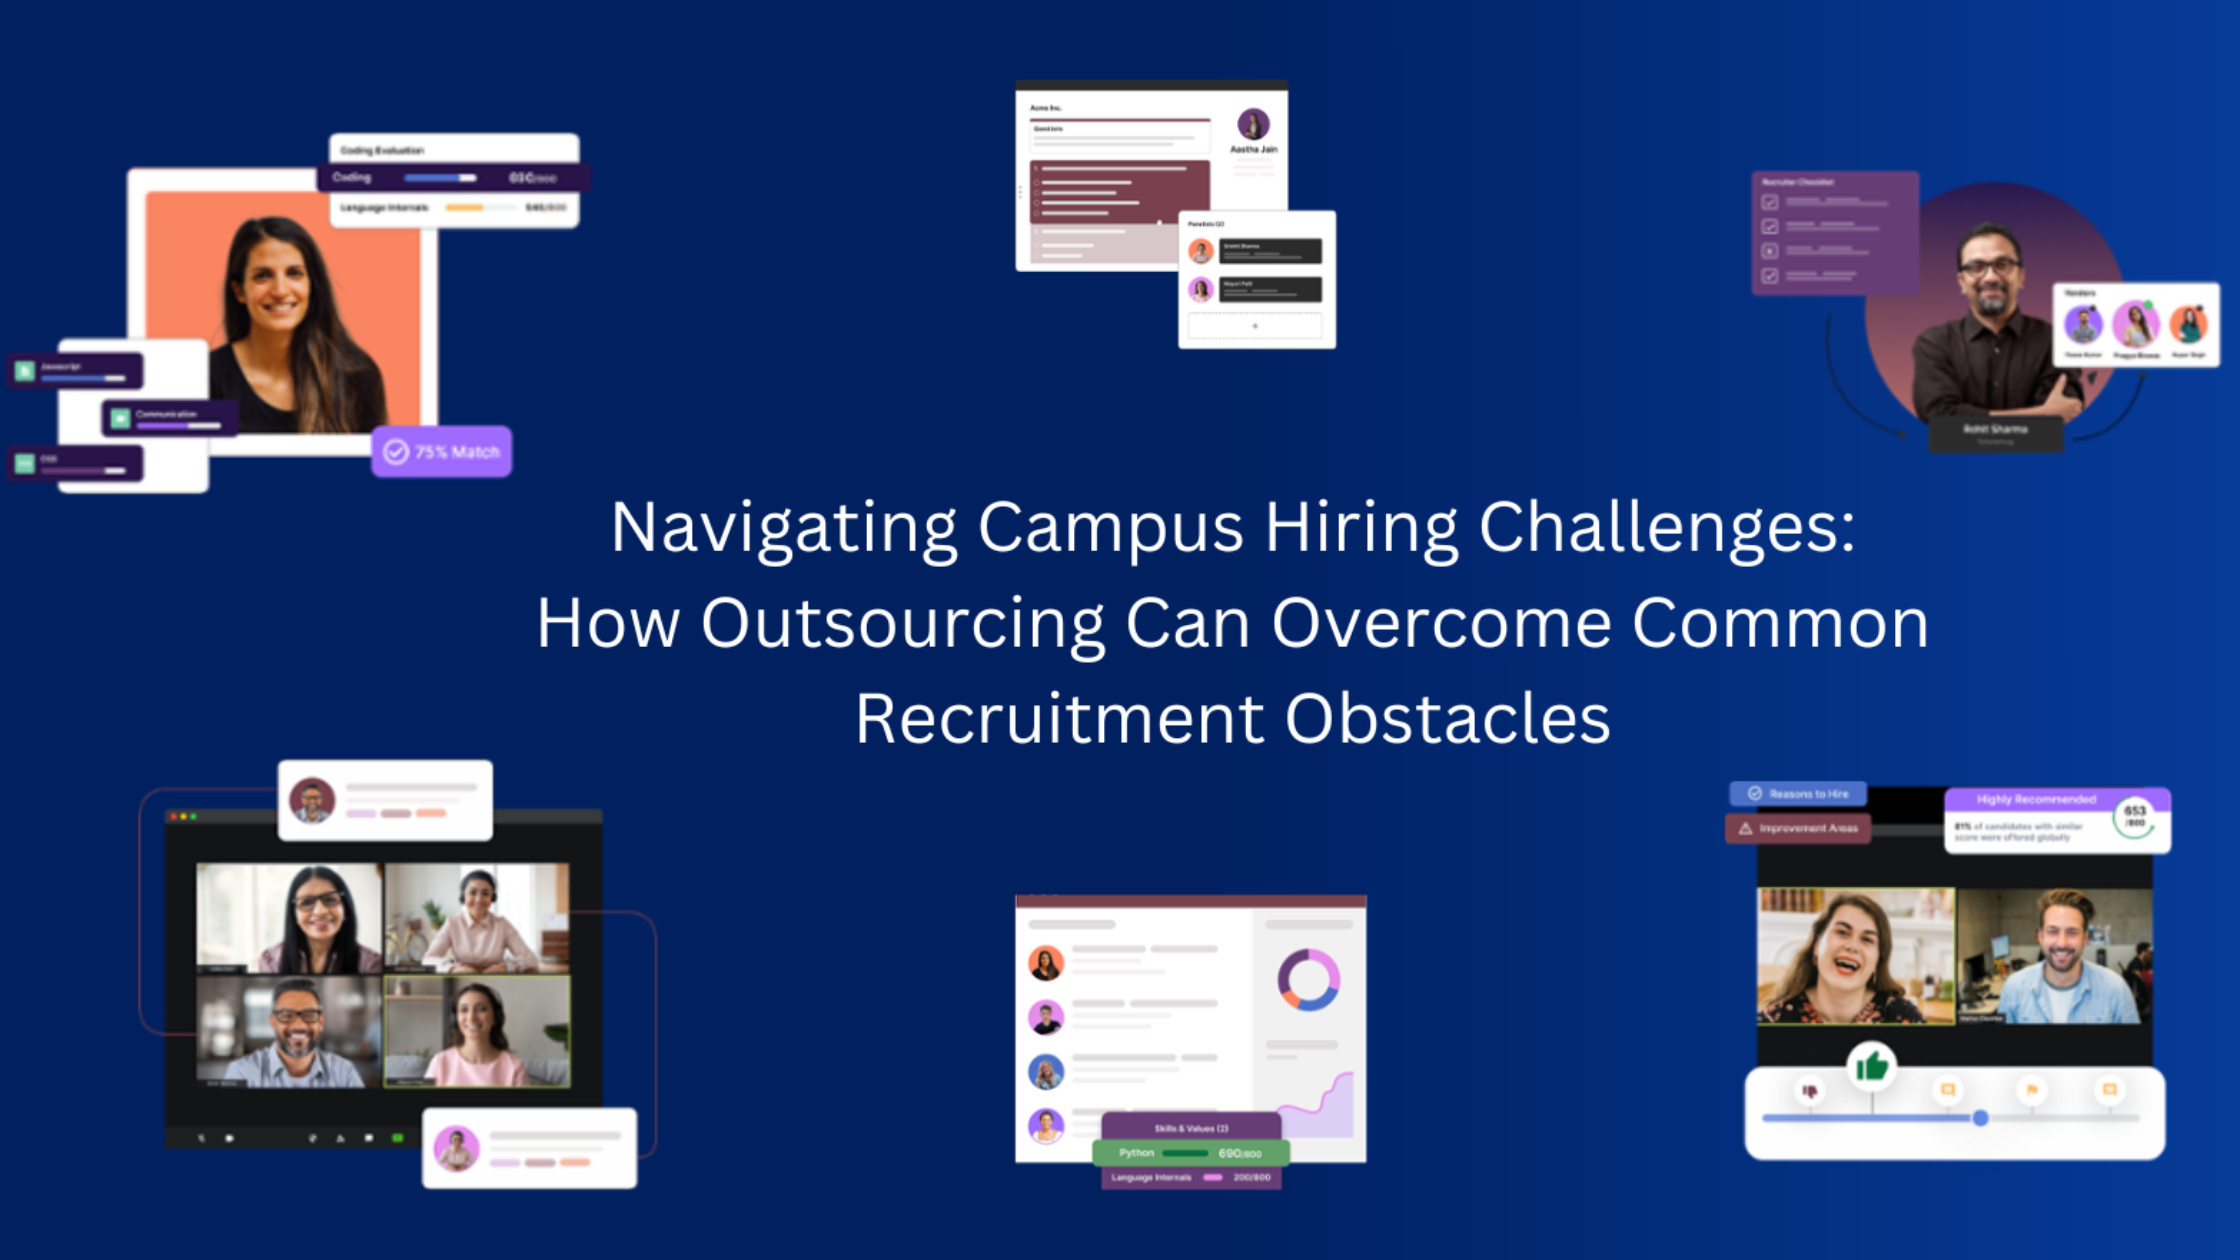 Navigating Campus Hiring Challenges: How Outsourcing Can Overcome Common Recruitment Obstacles